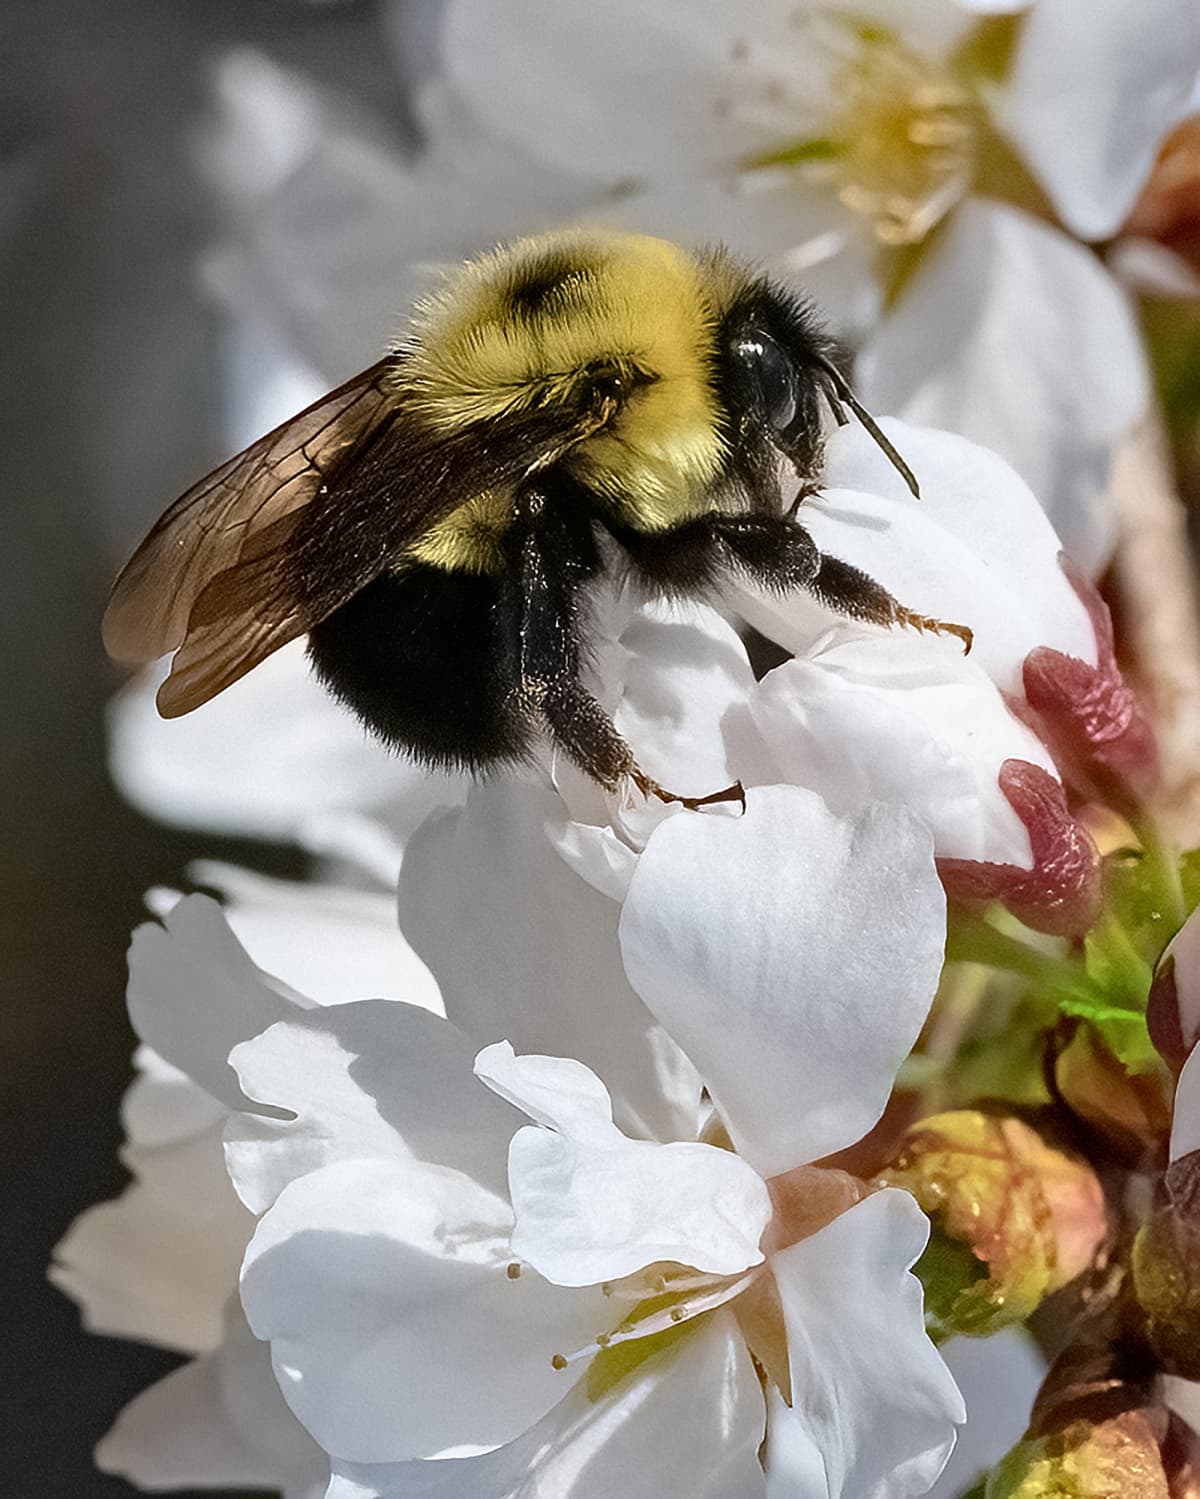 A bumble bee on a flower